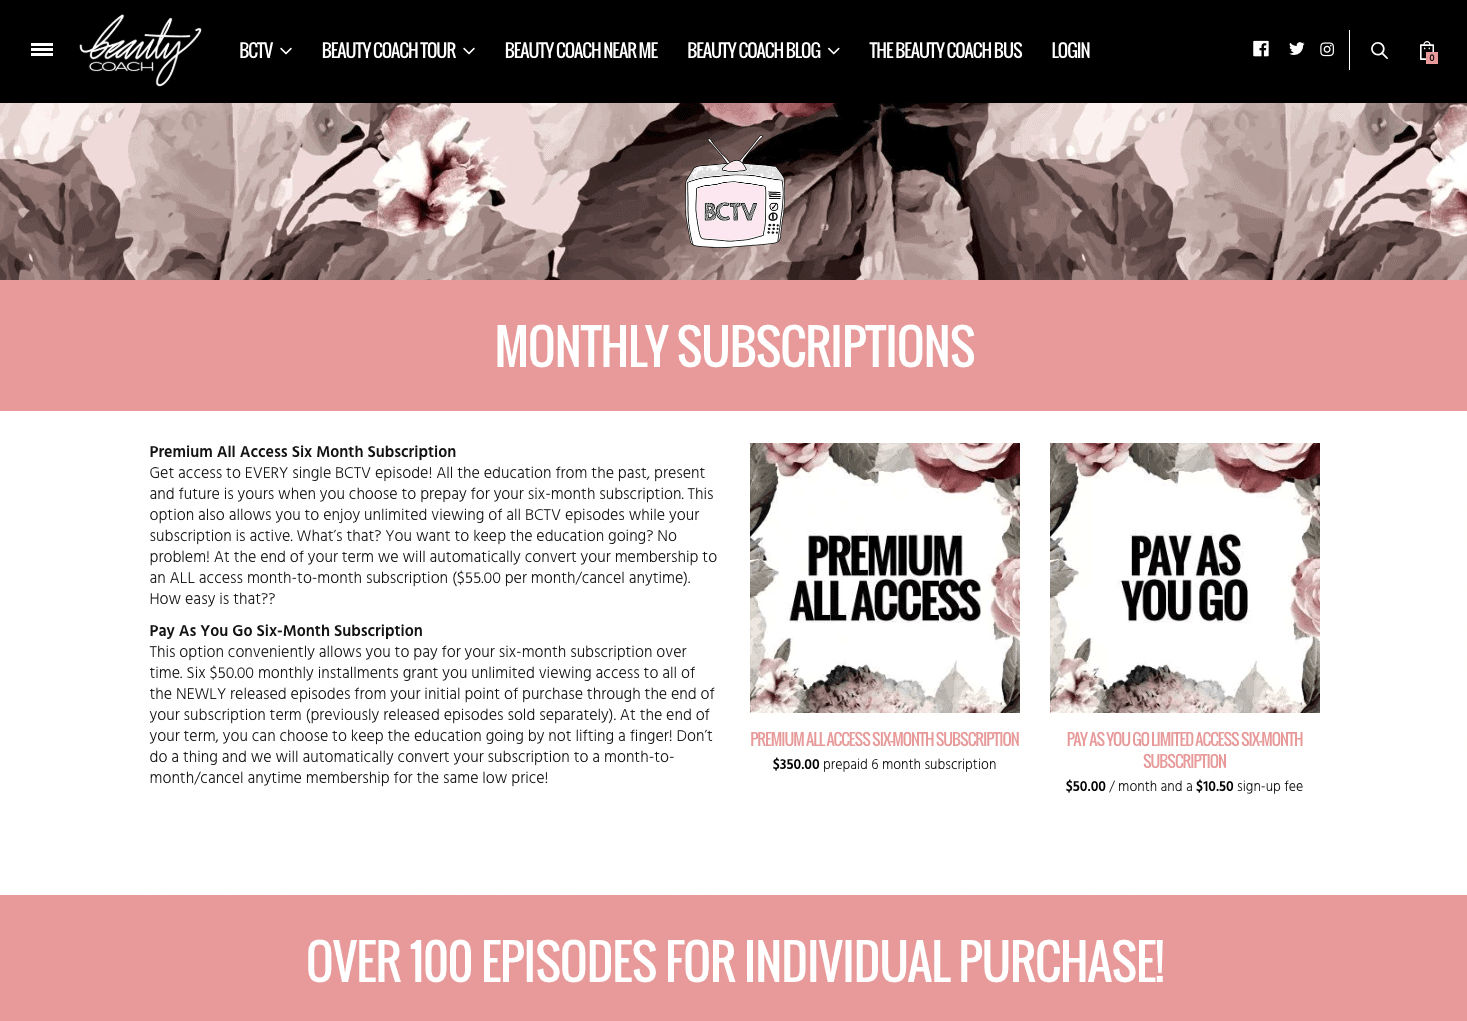 Subscriptions page